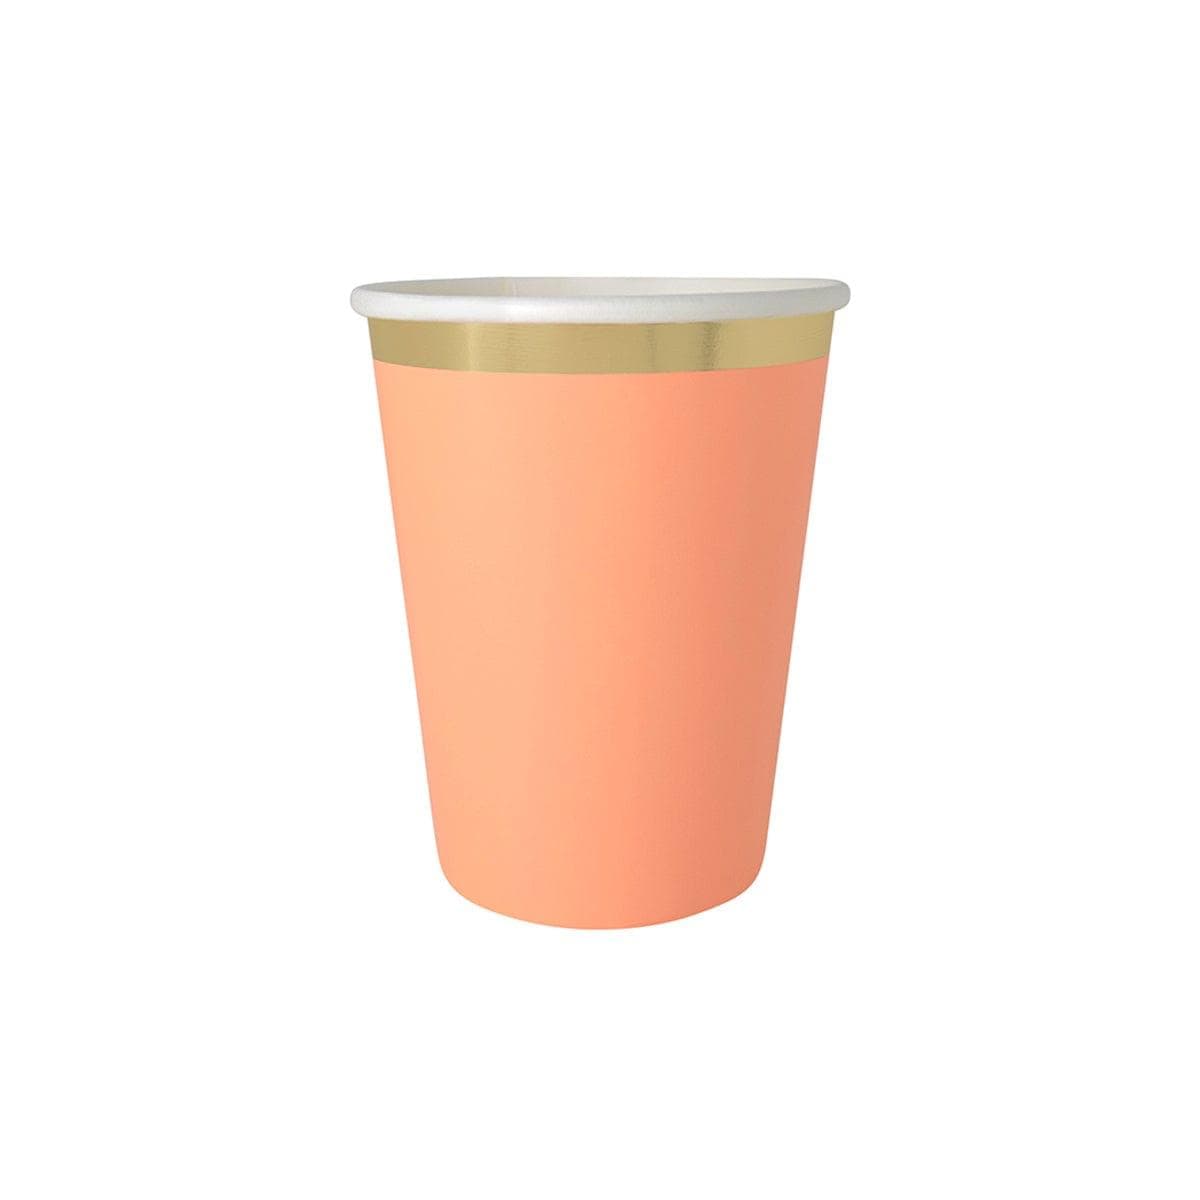 YIWU SANDY PAPER PRODUCTS CO., LTD Everyday Entertaining Orange Cups, 9 Oz, 8 Count